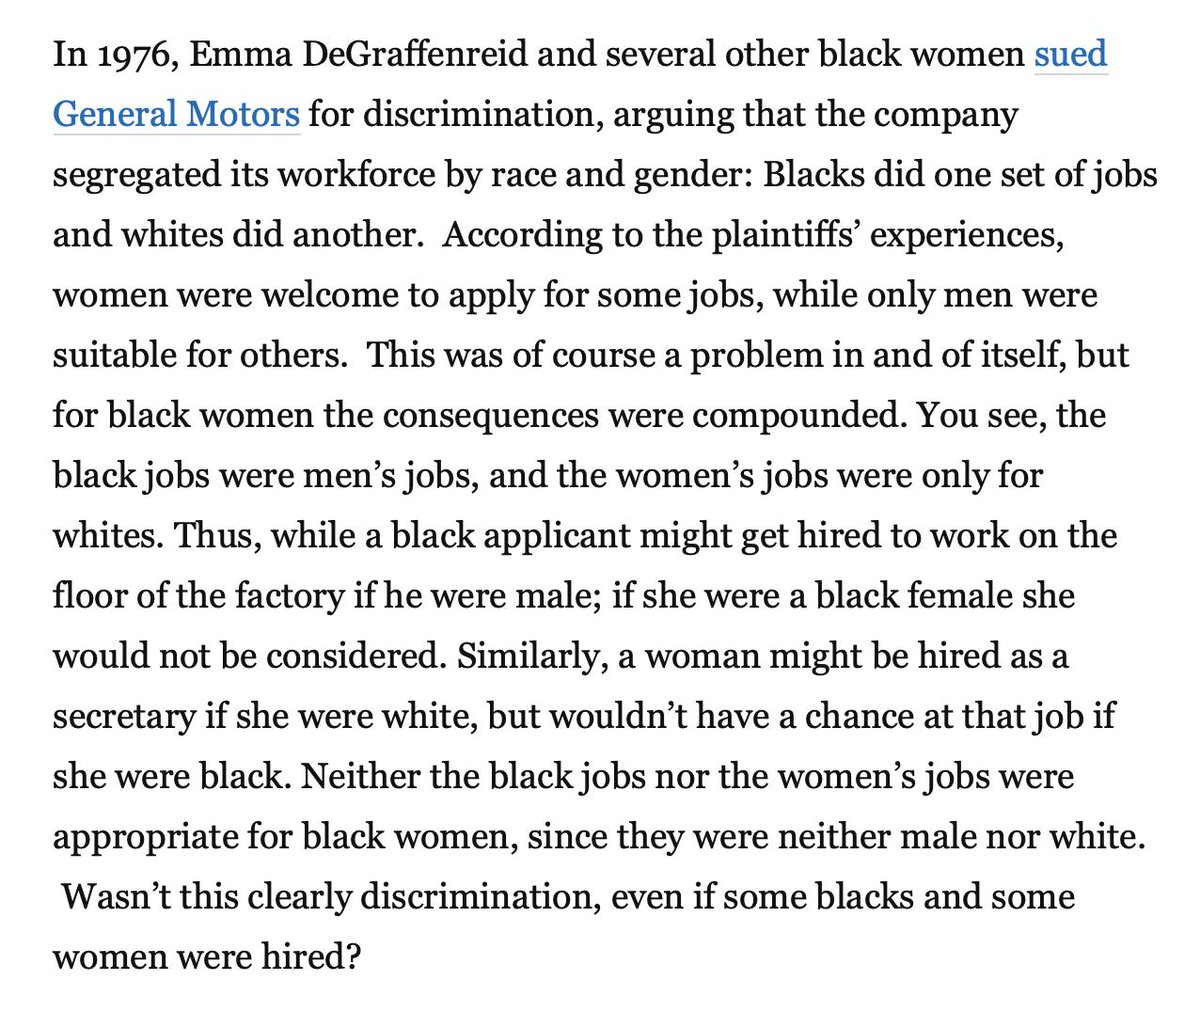 Crenshaw's op-ed:1) explains the GM case she talked about 20 years ago2) explains that intersectionality is an "analytic sensibility, a way of thinking about identity and its relationship to power."It's right there,  @benshapiro! There's no need to straw man her arguments!